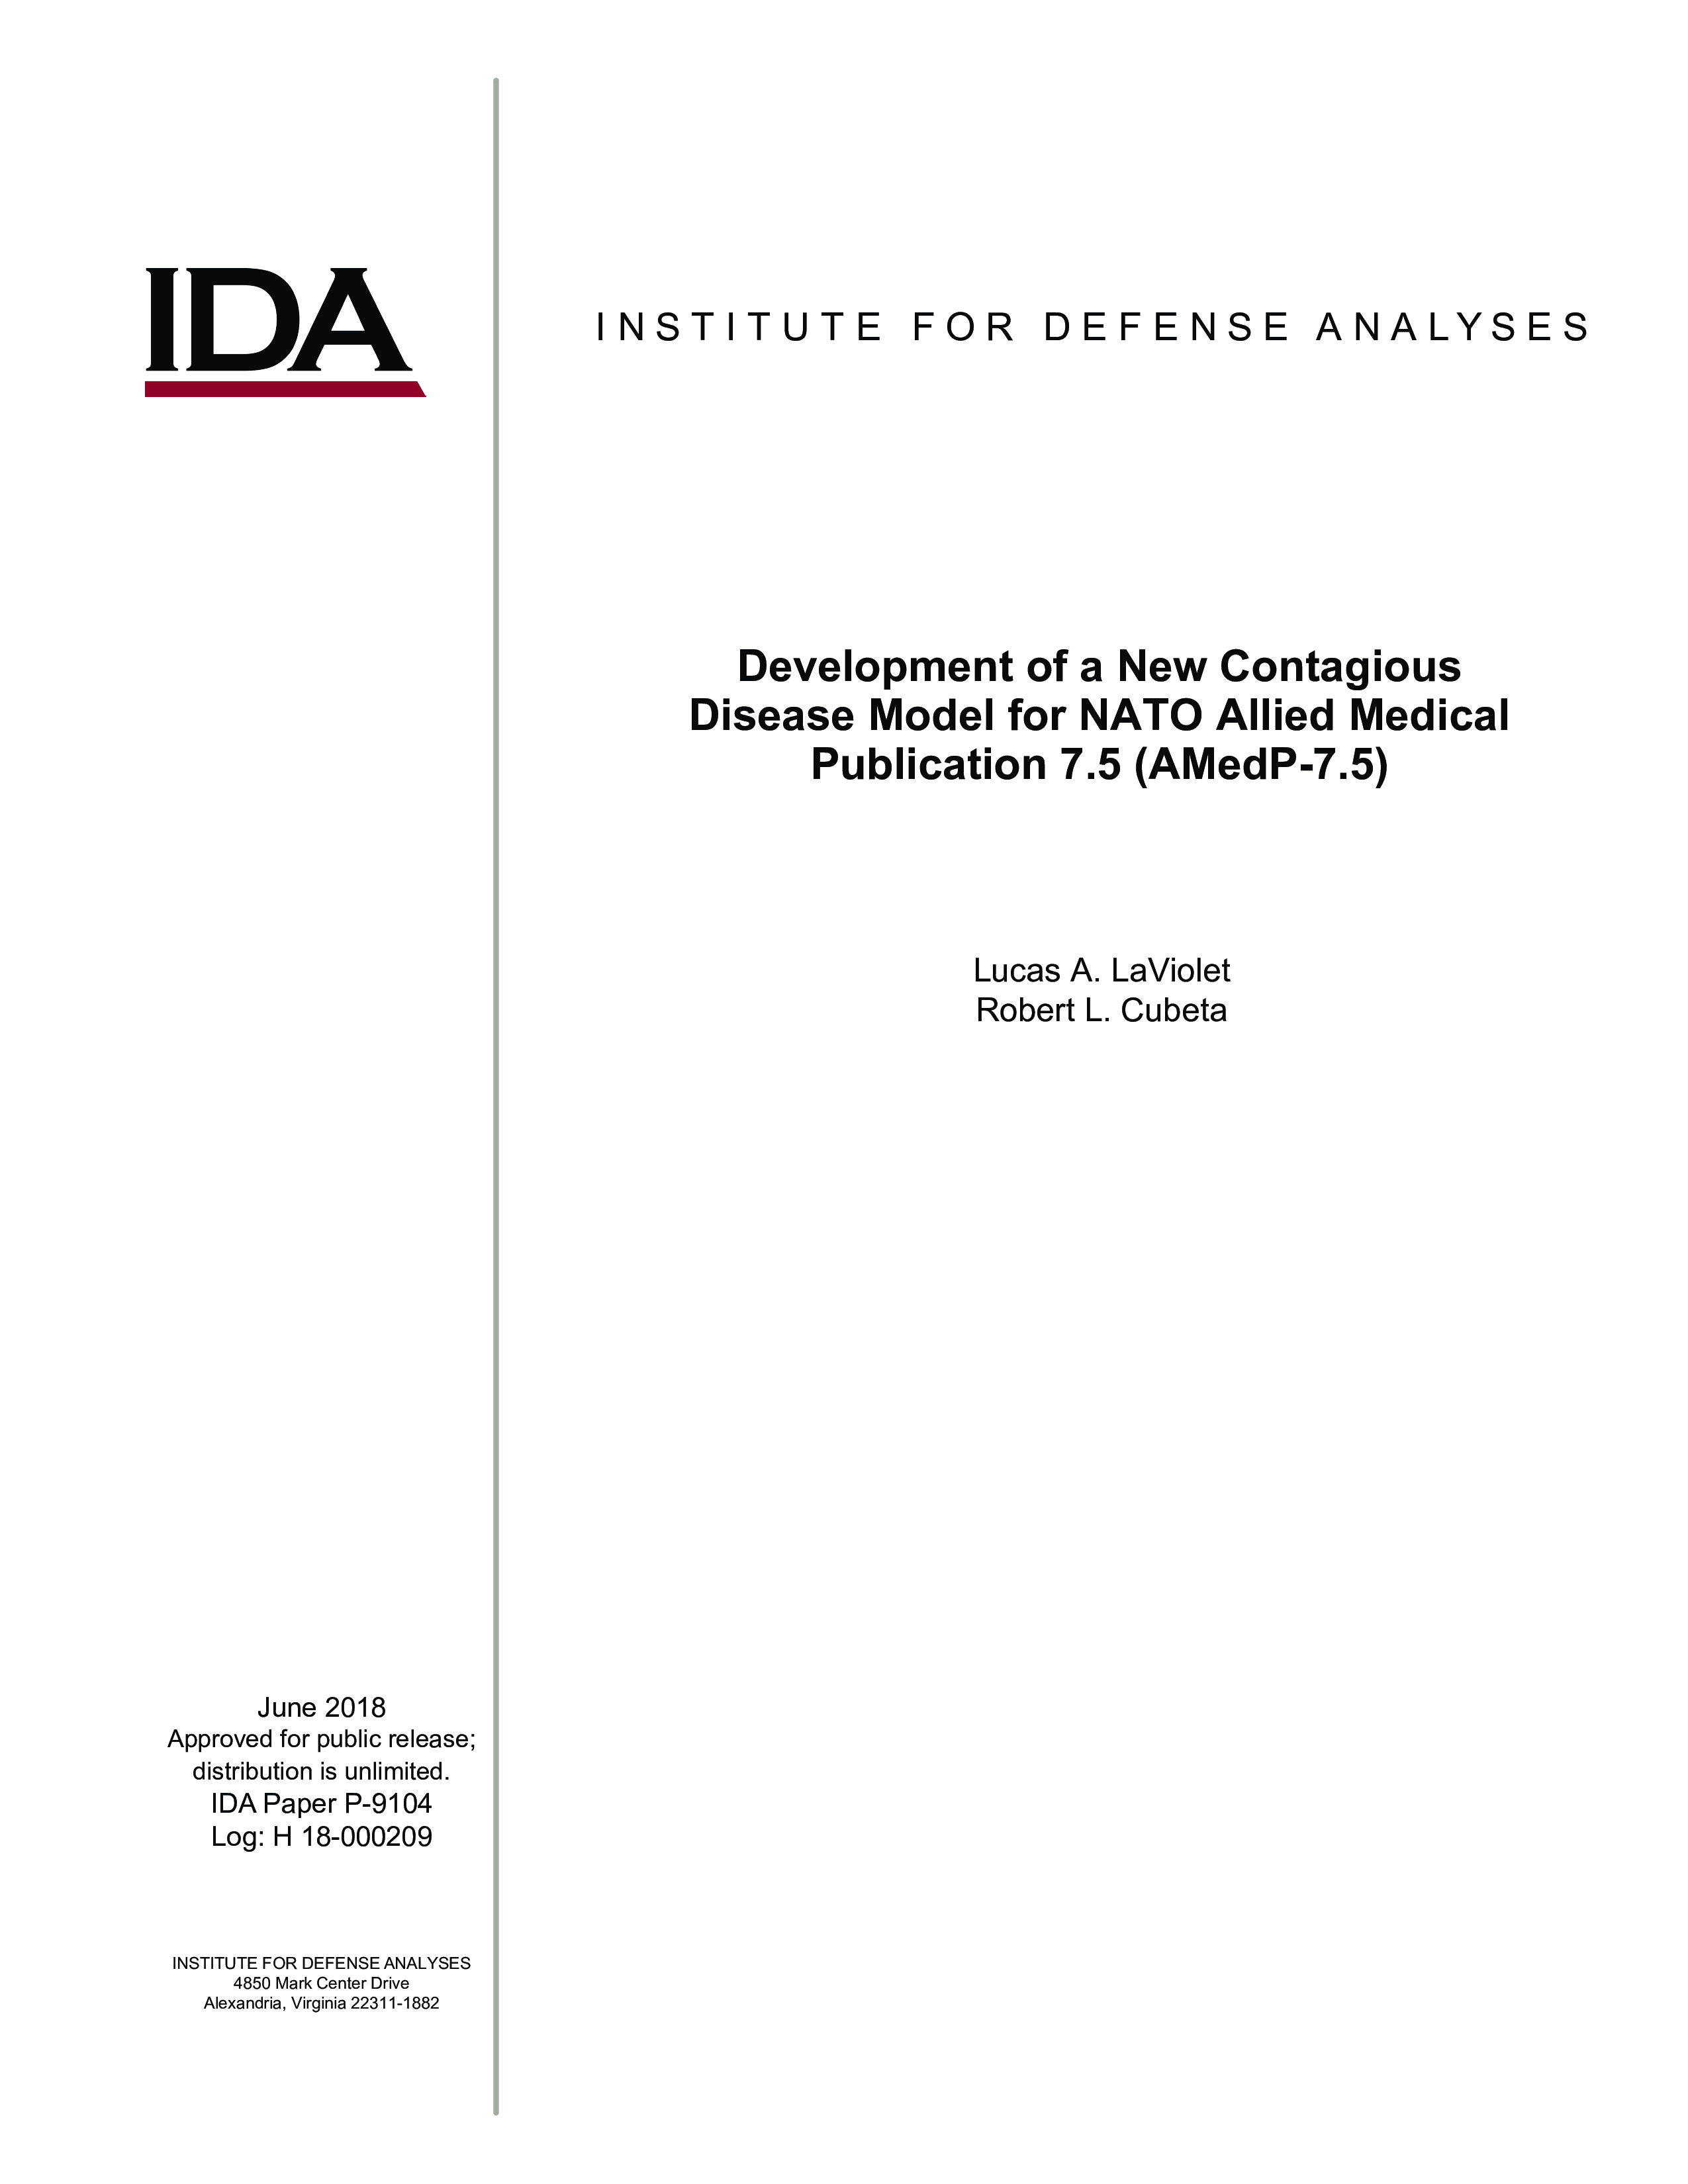 Development of a New Contagious Disease Model for NATO Allied Medical Publication 7.5 (AMedP-7.5)